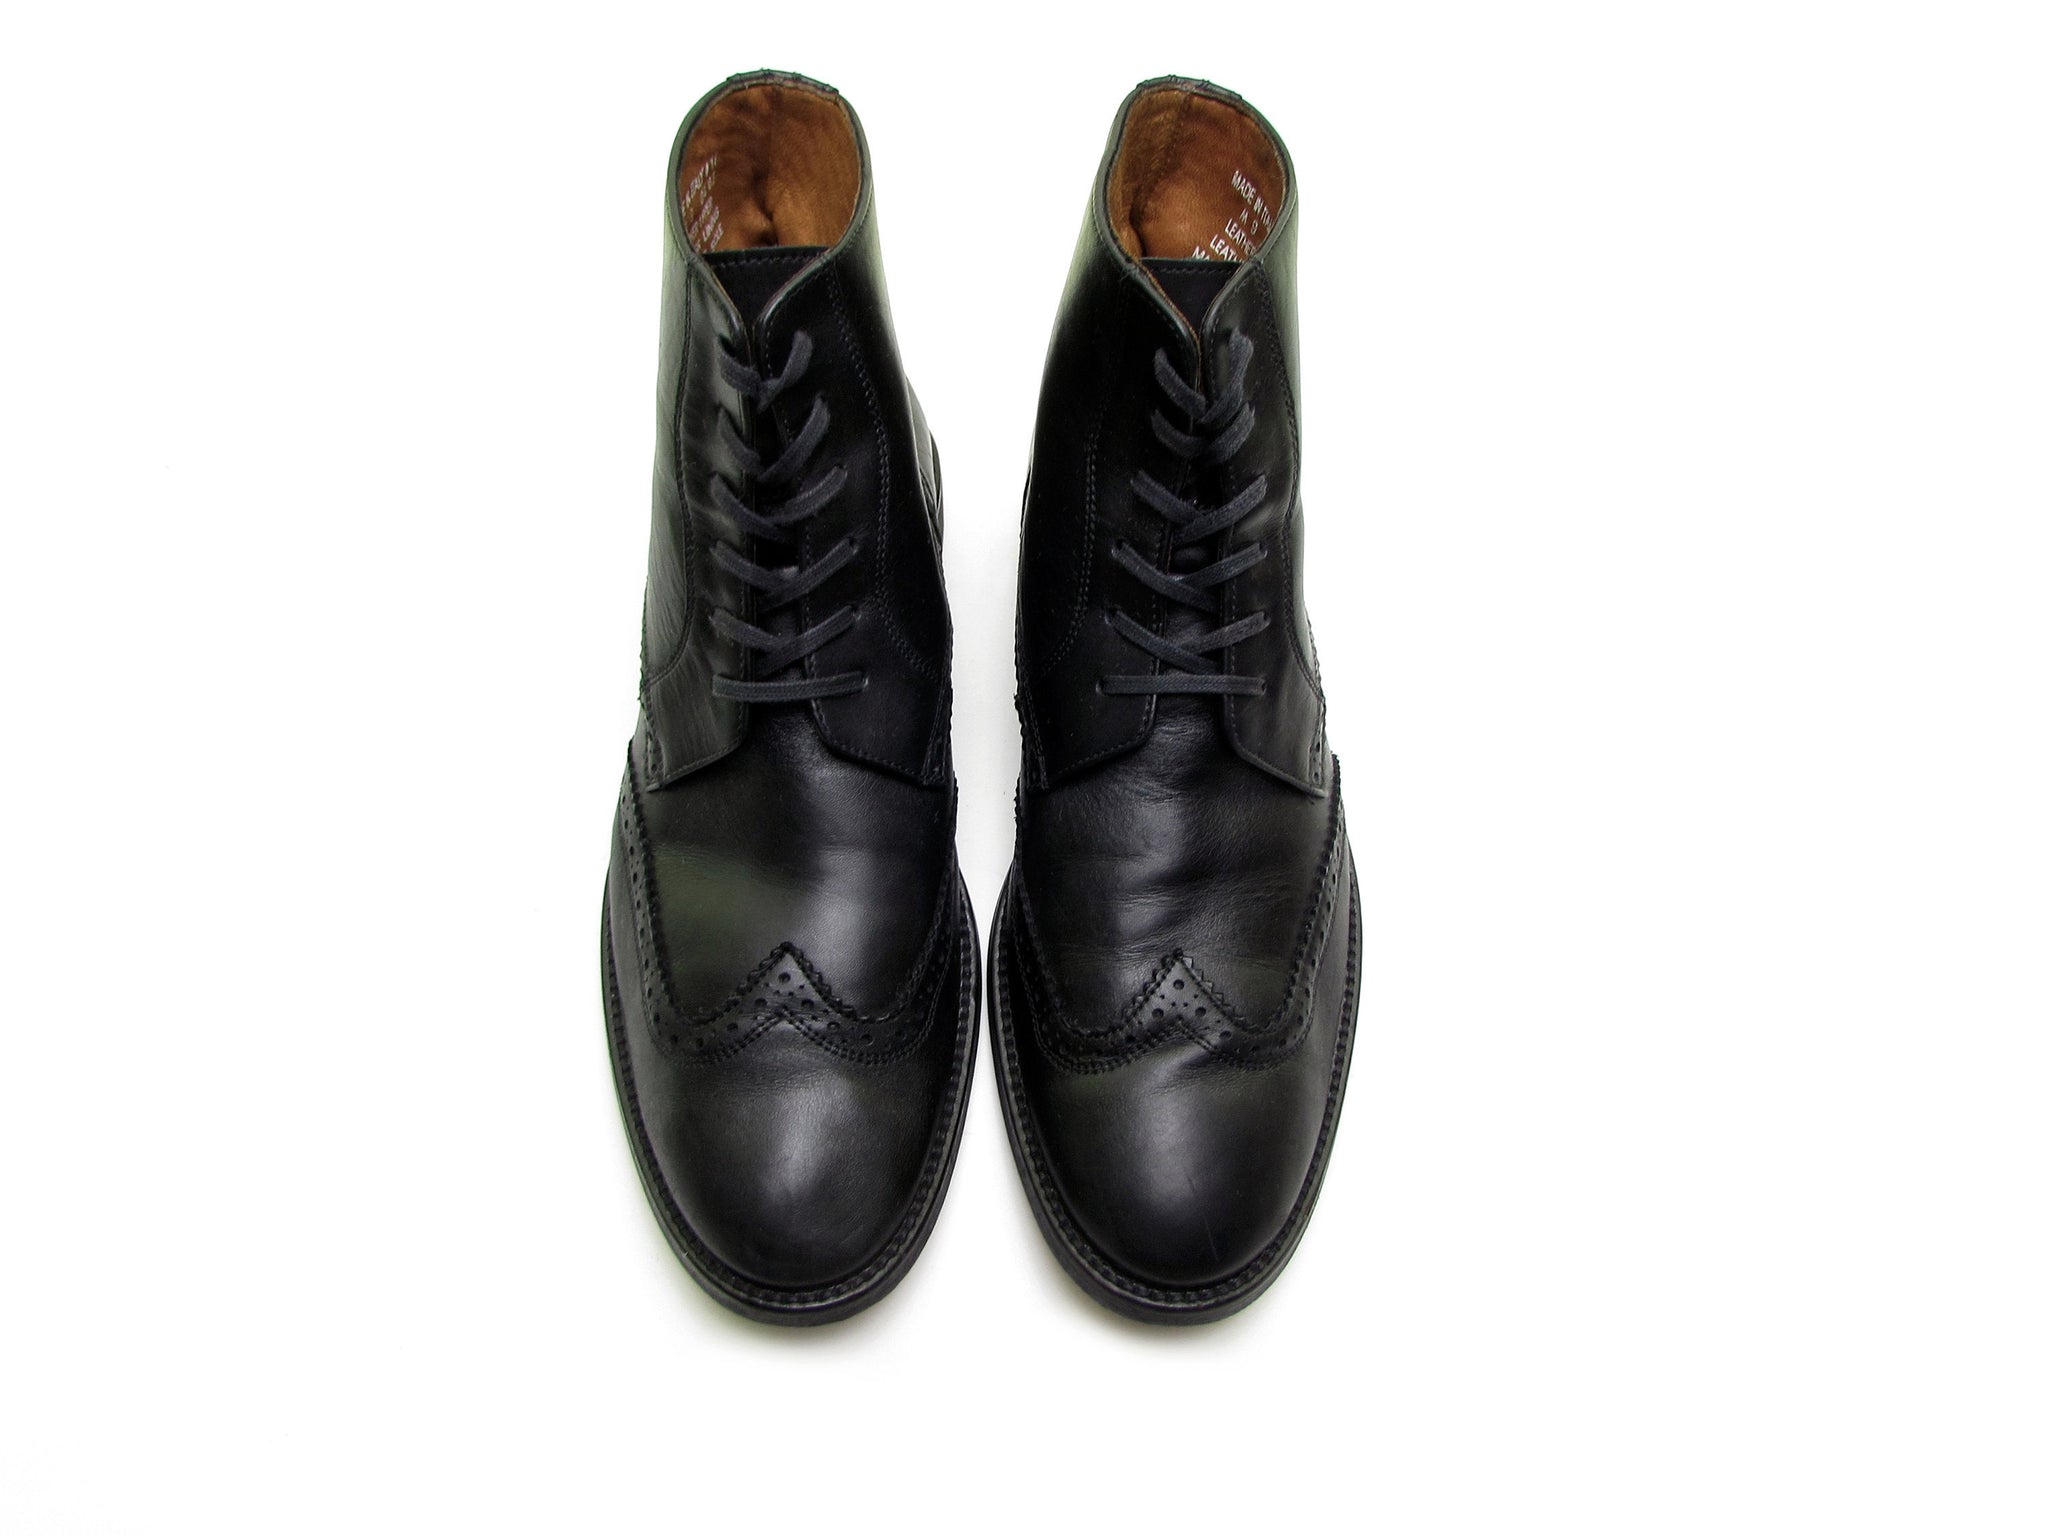 Vintage Italian leather boots brogue boots oxford boots lace up boots black chelsea boots beatle boots 90s vintage boots mens, Made in Italy. Size 9 – vintage90s.com